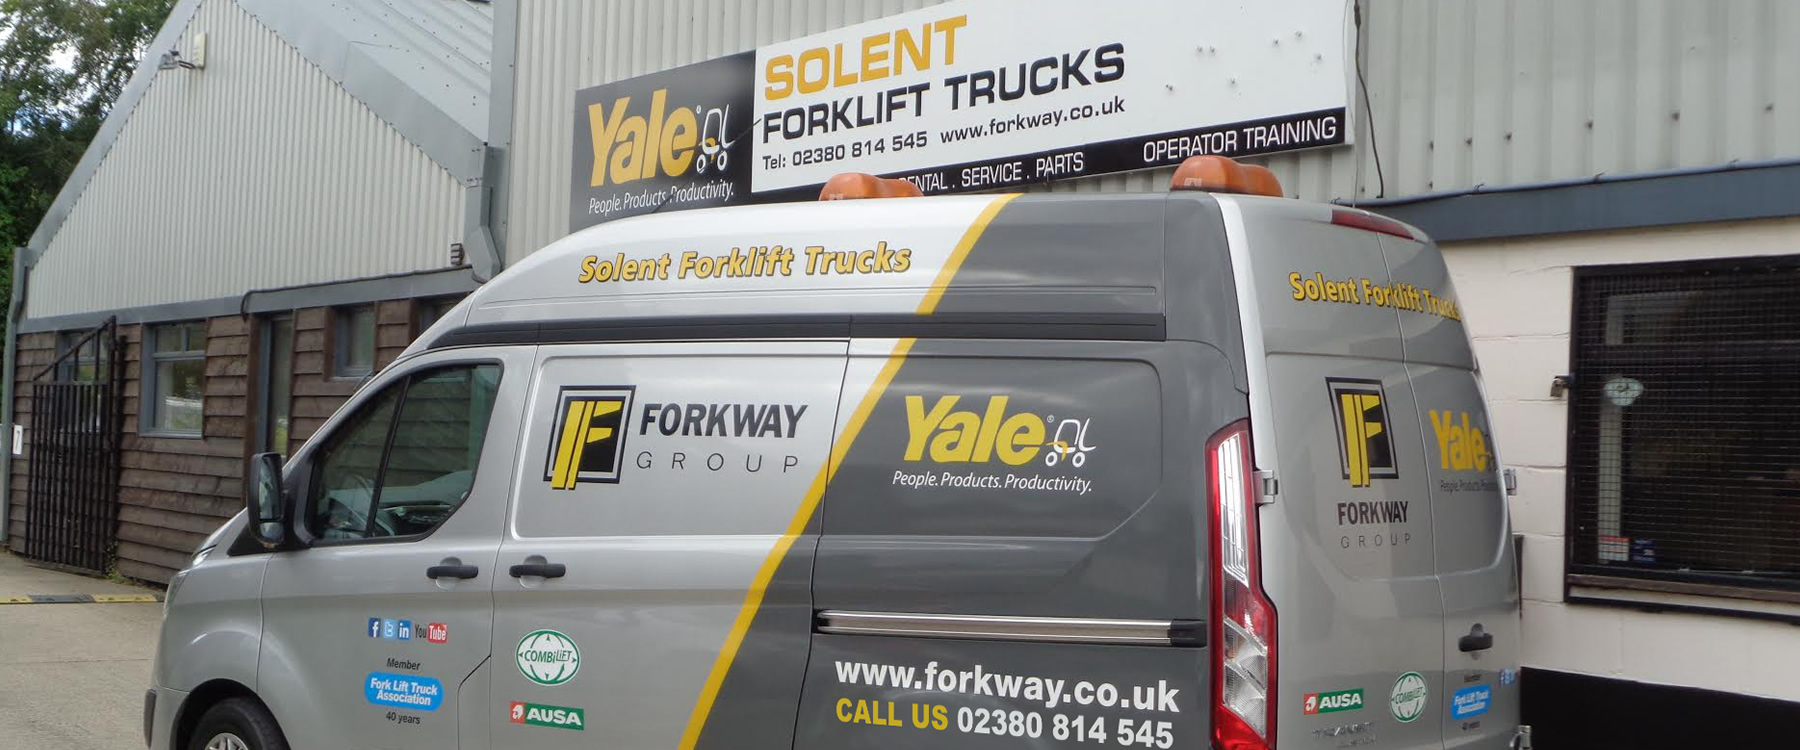 Yale Forklifts and Warehousing Equipment